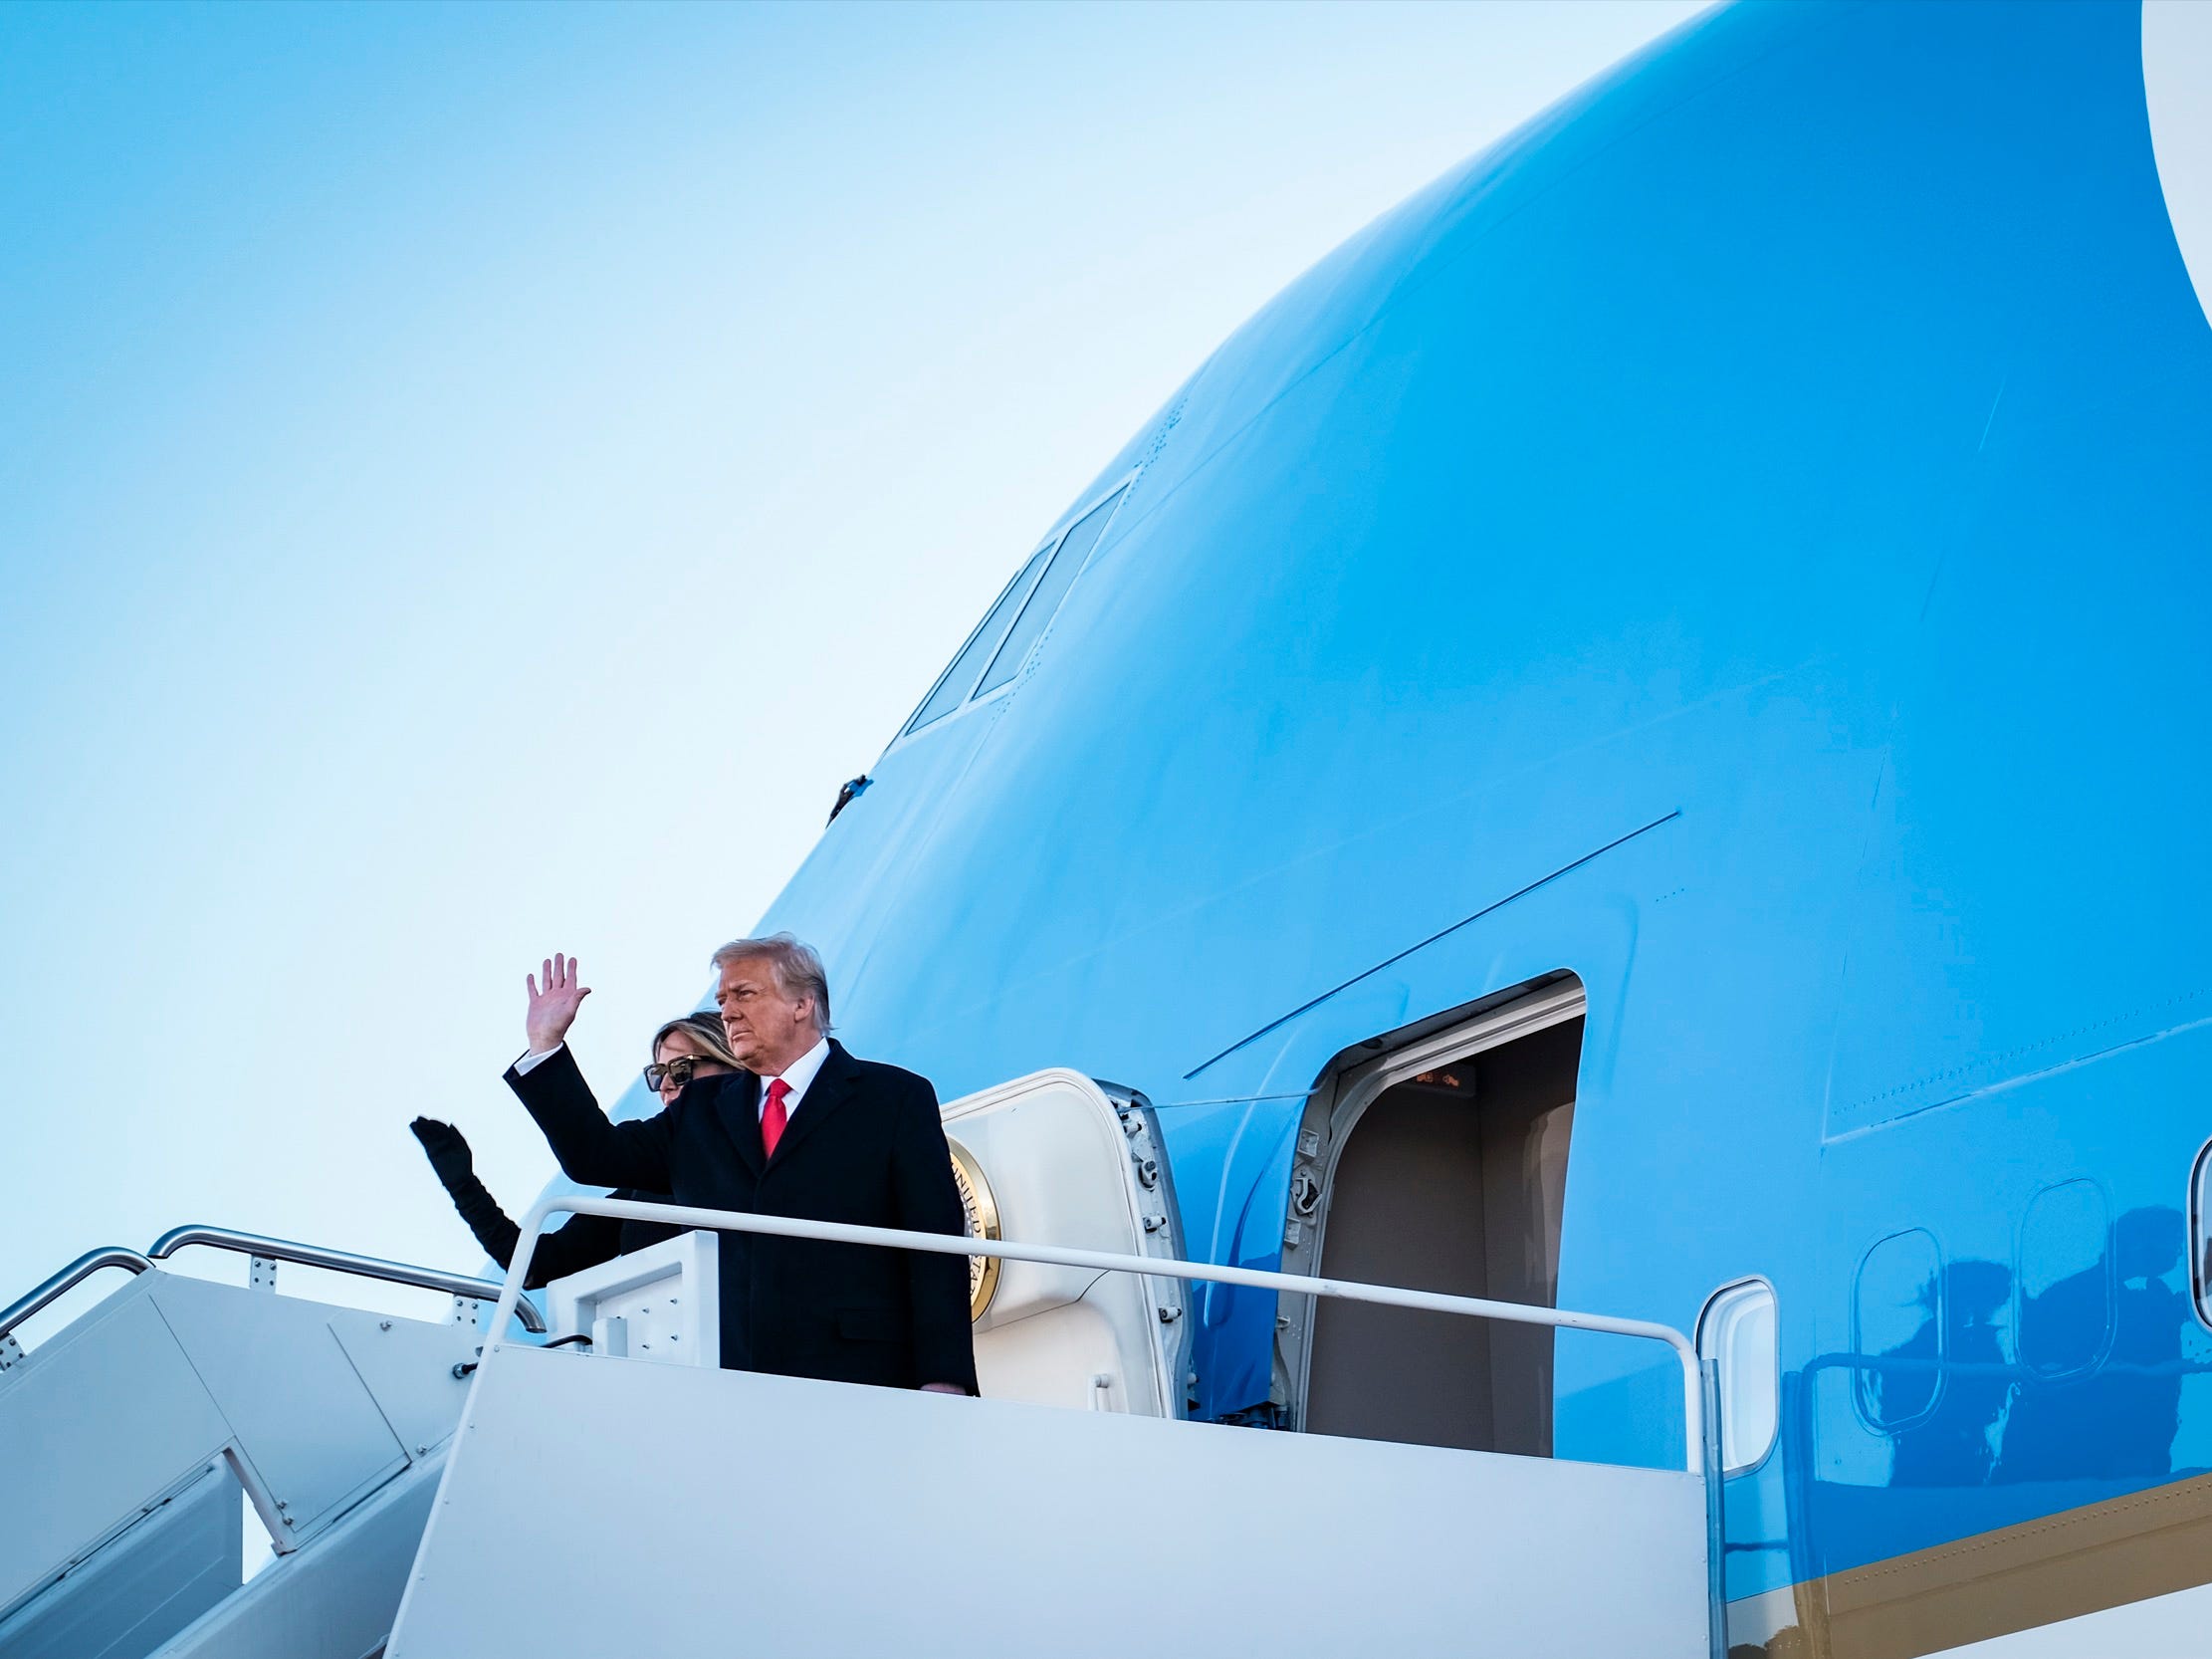 What We Know About the $5.3 Billion Air Force One Replacement Program